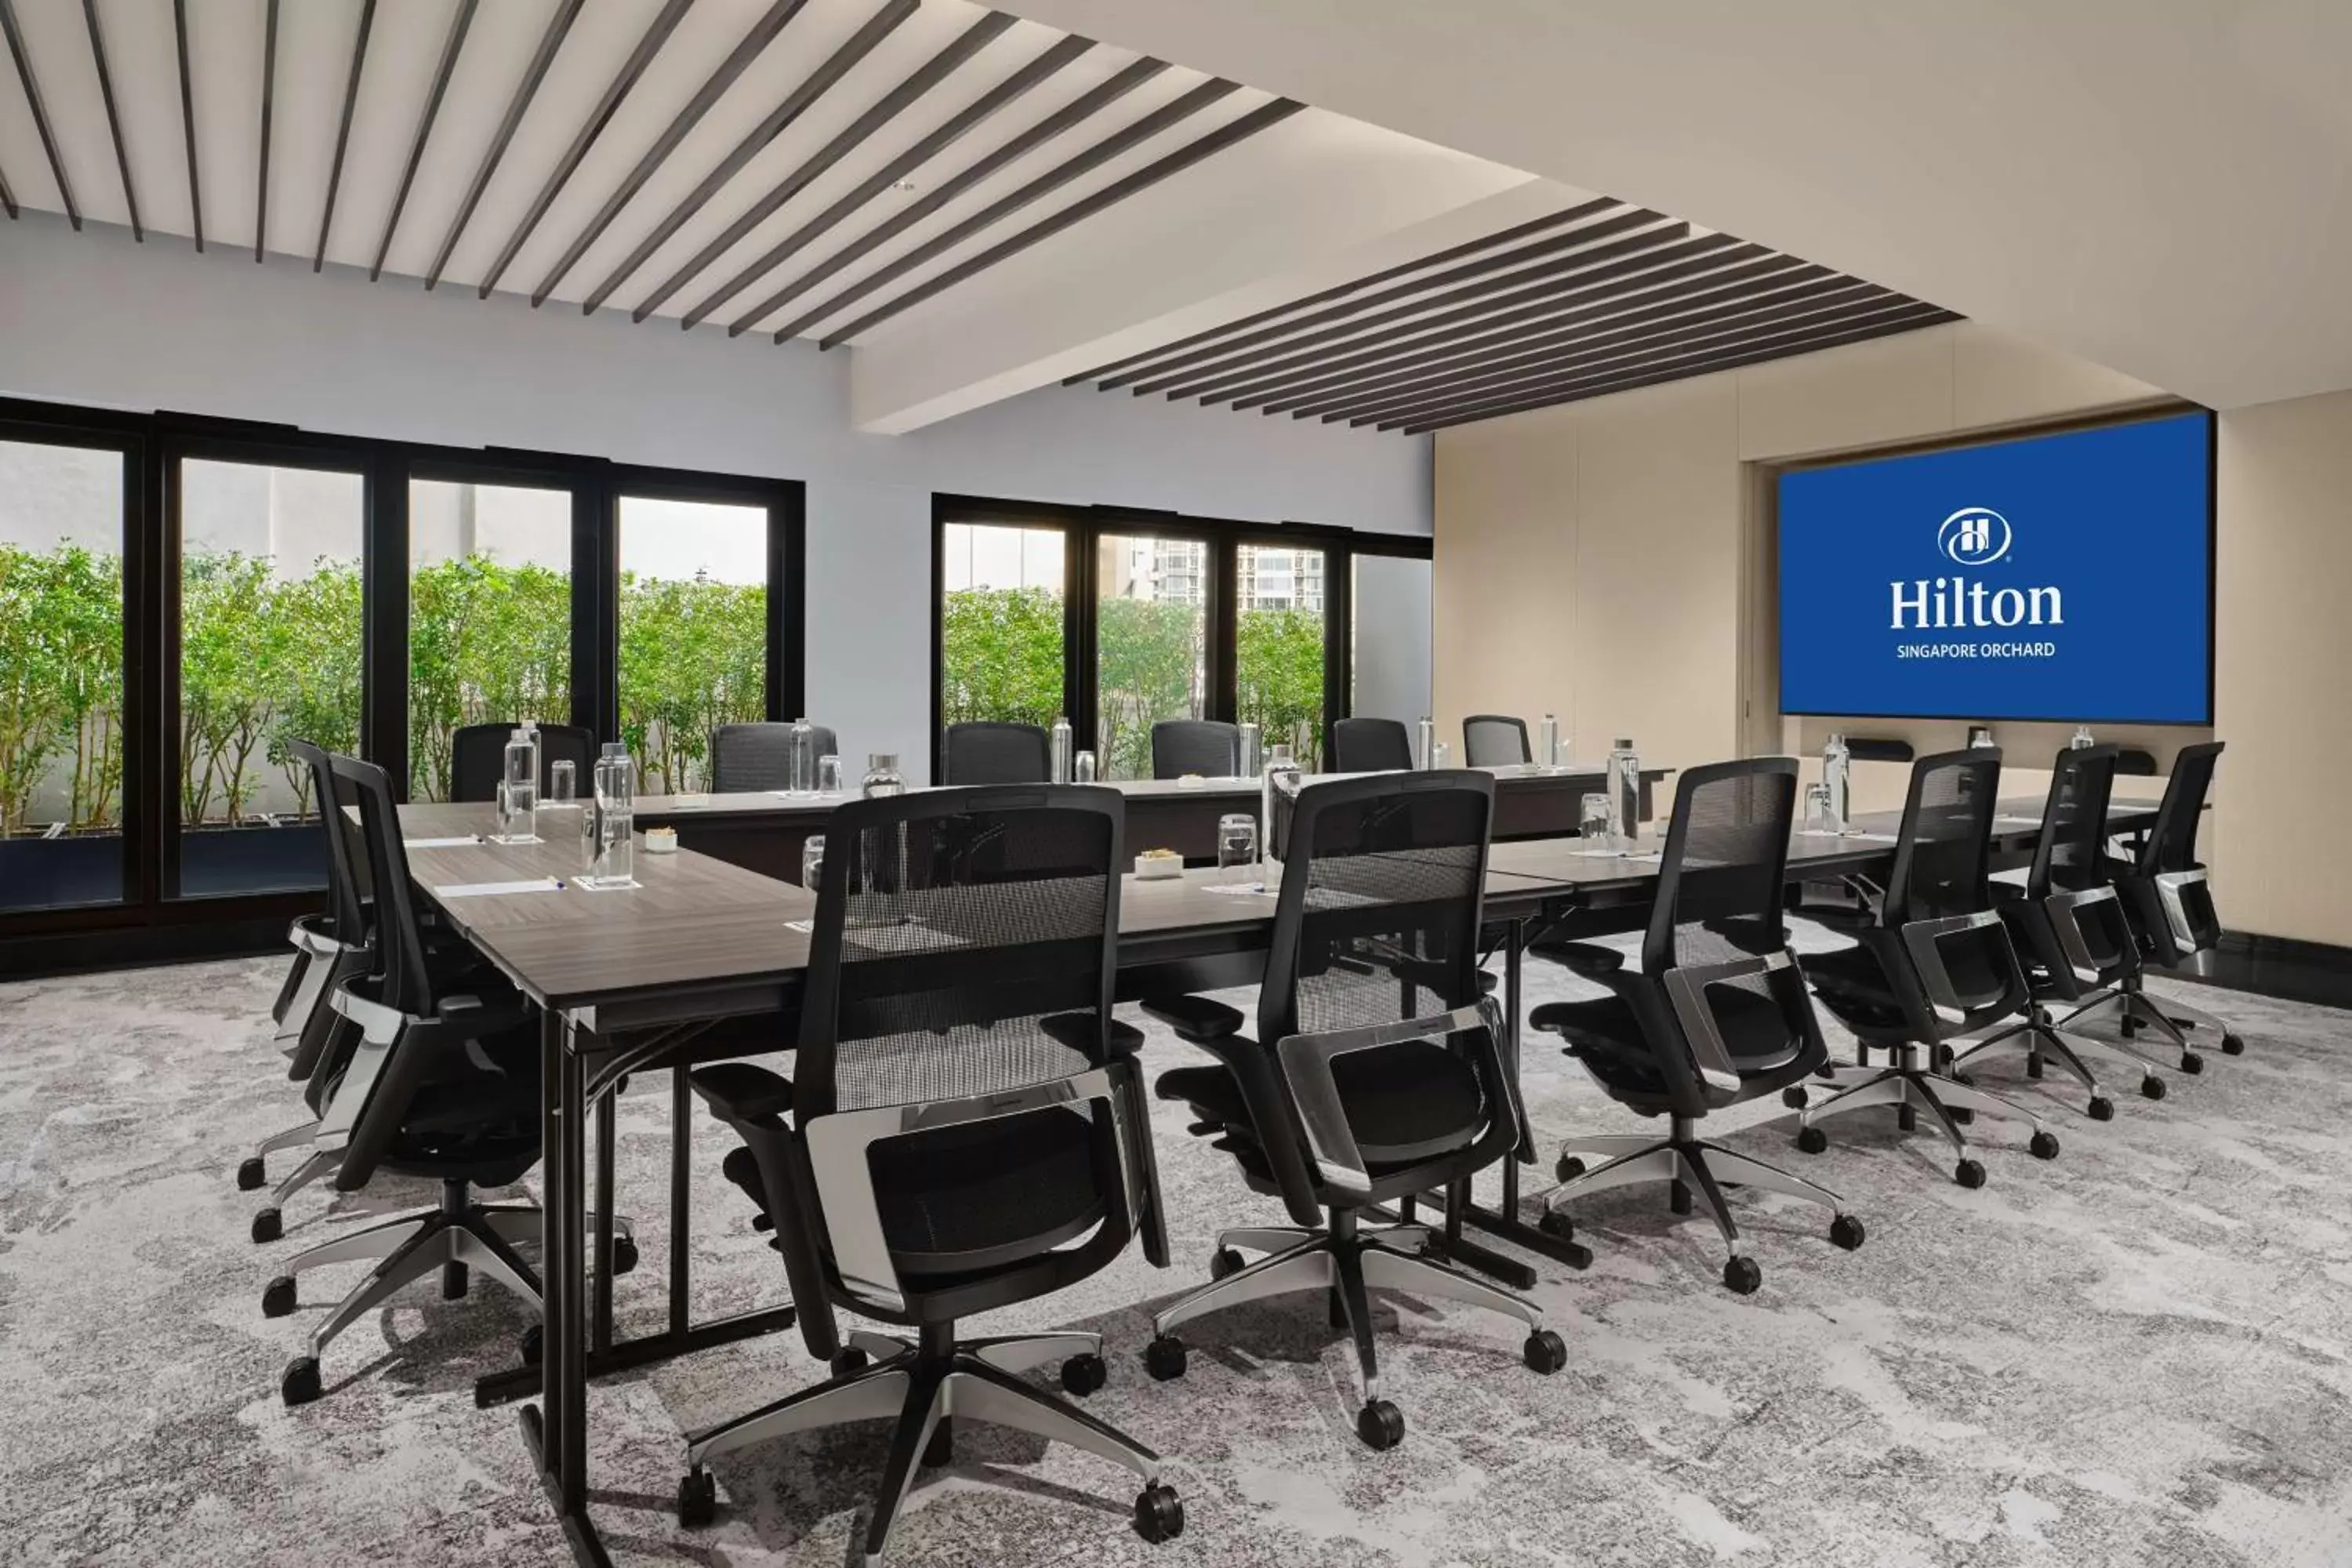 Meeting/conference room in Hilton Singapore Orchard